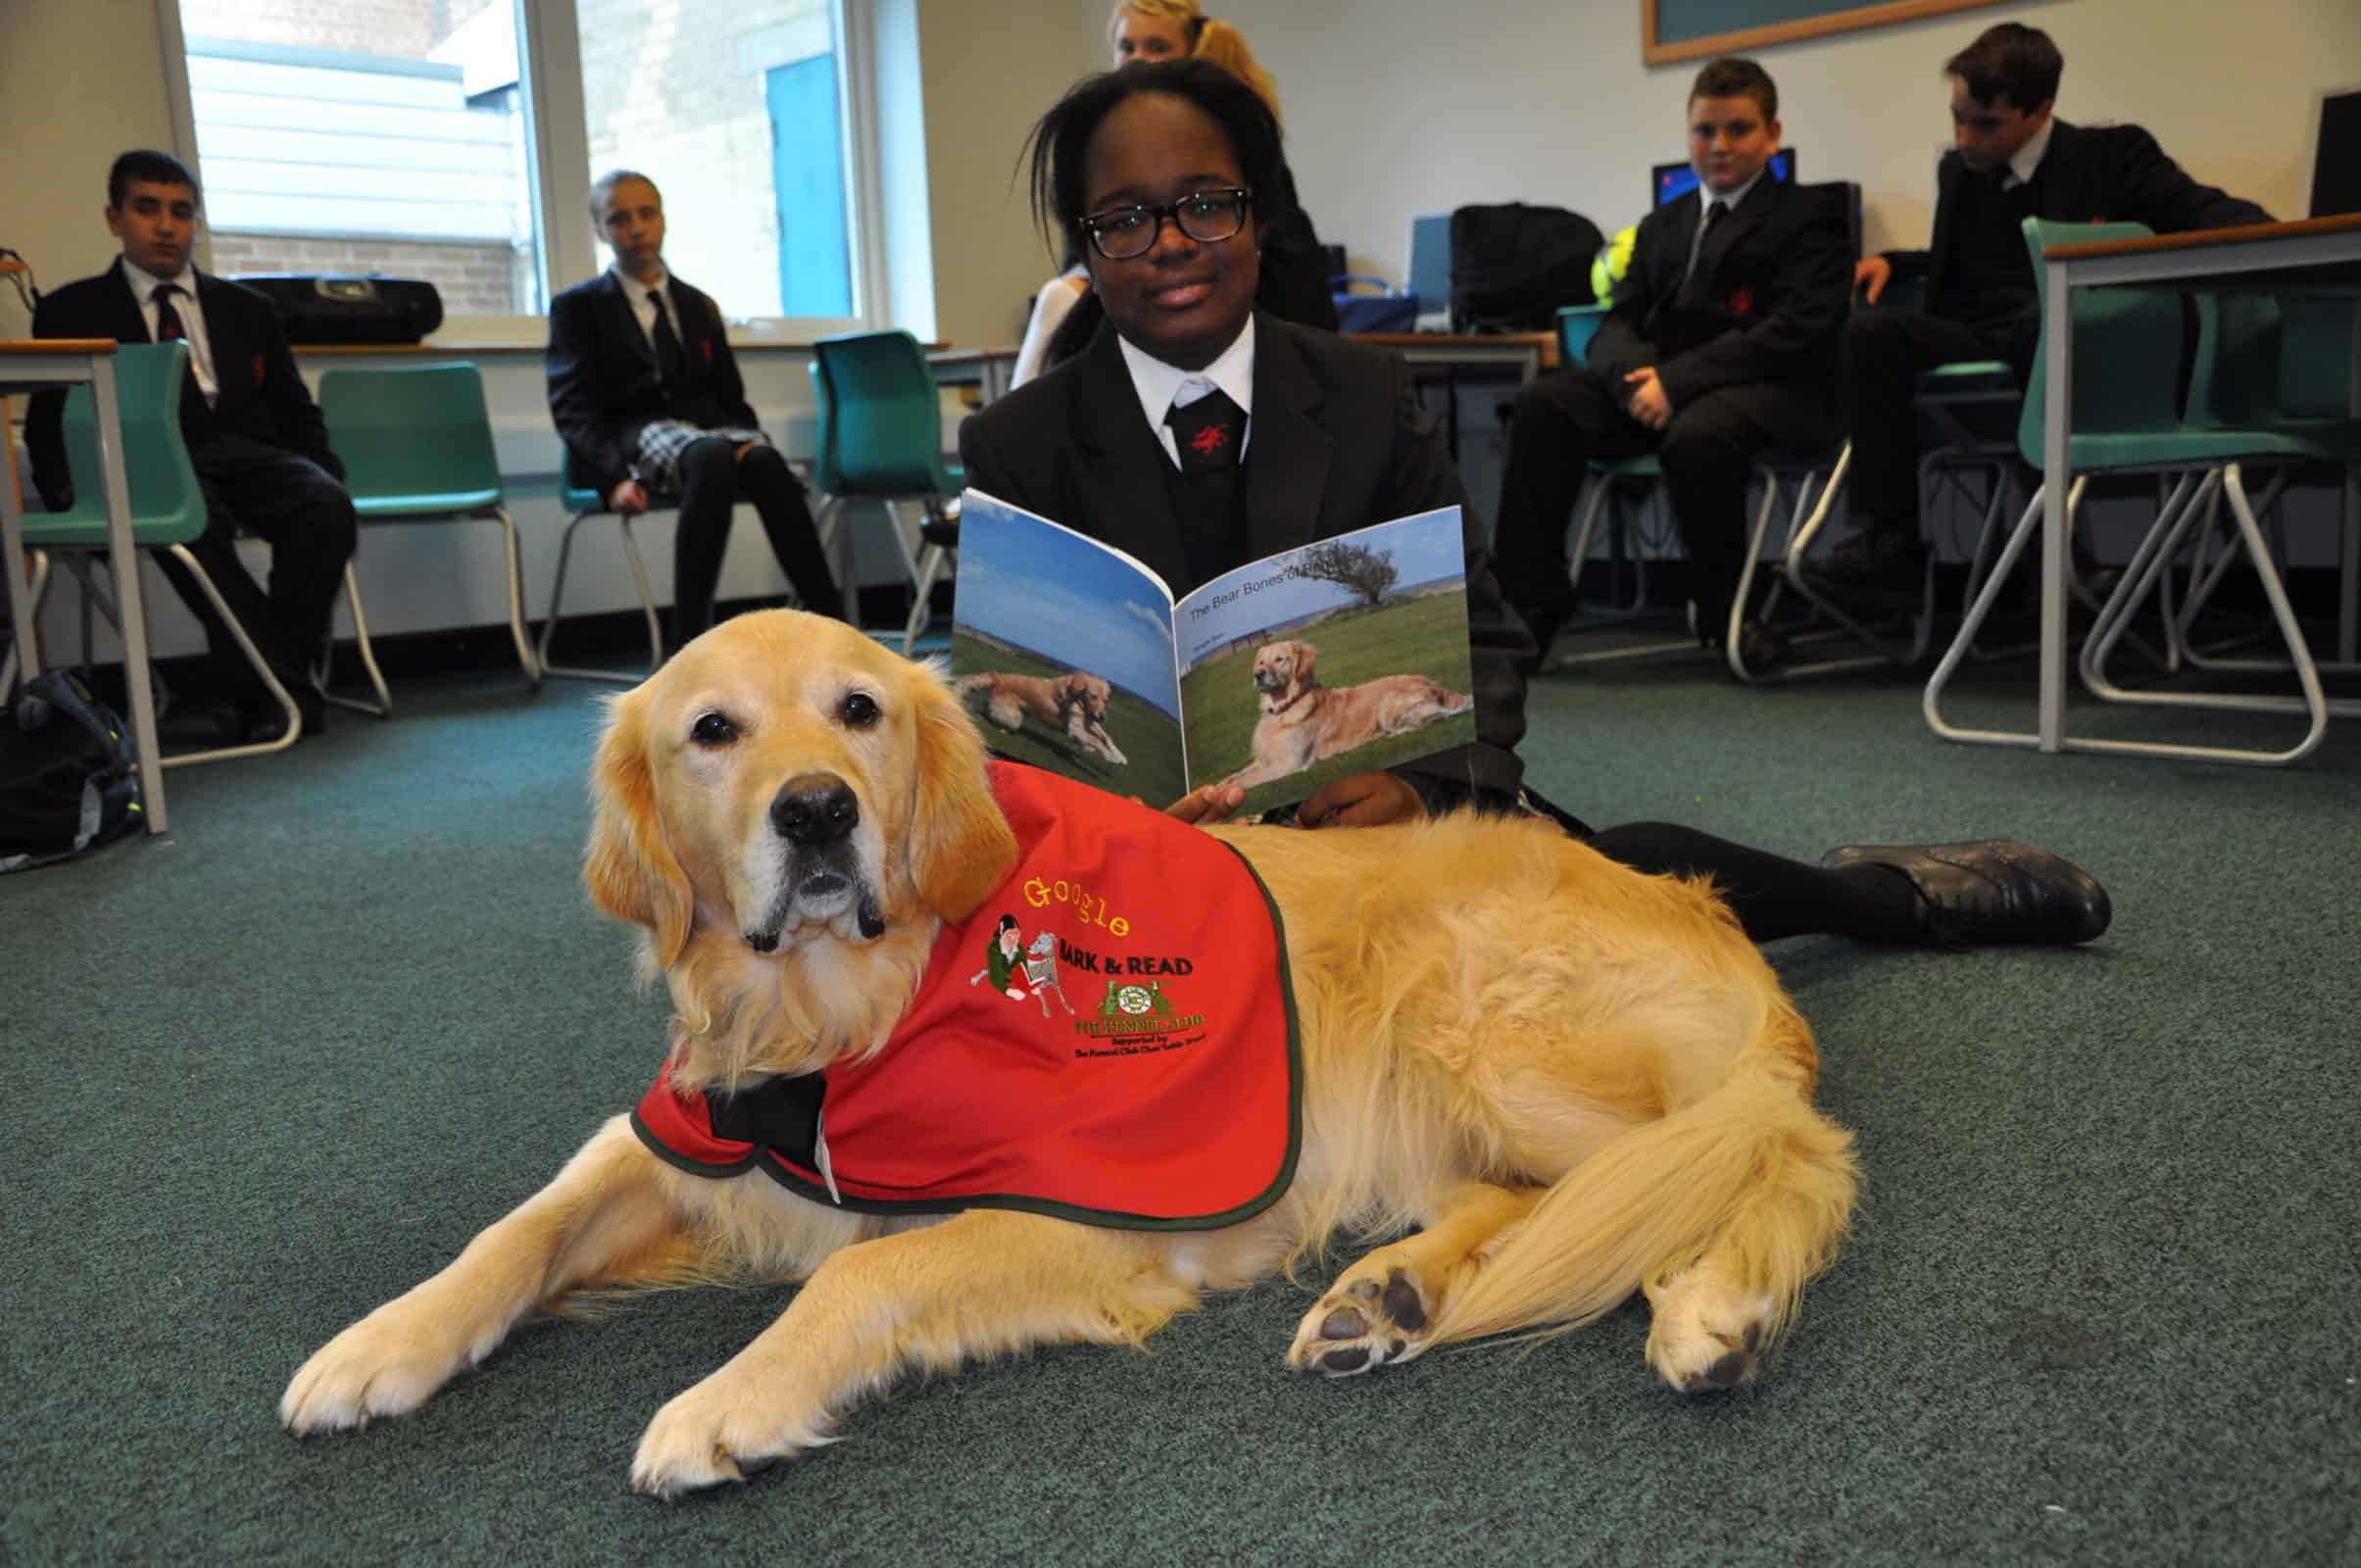 When kids read to dogs their reading and confidence is given a boost. The Kennel Club explains why they train dogs to read in schools to improve child literacy